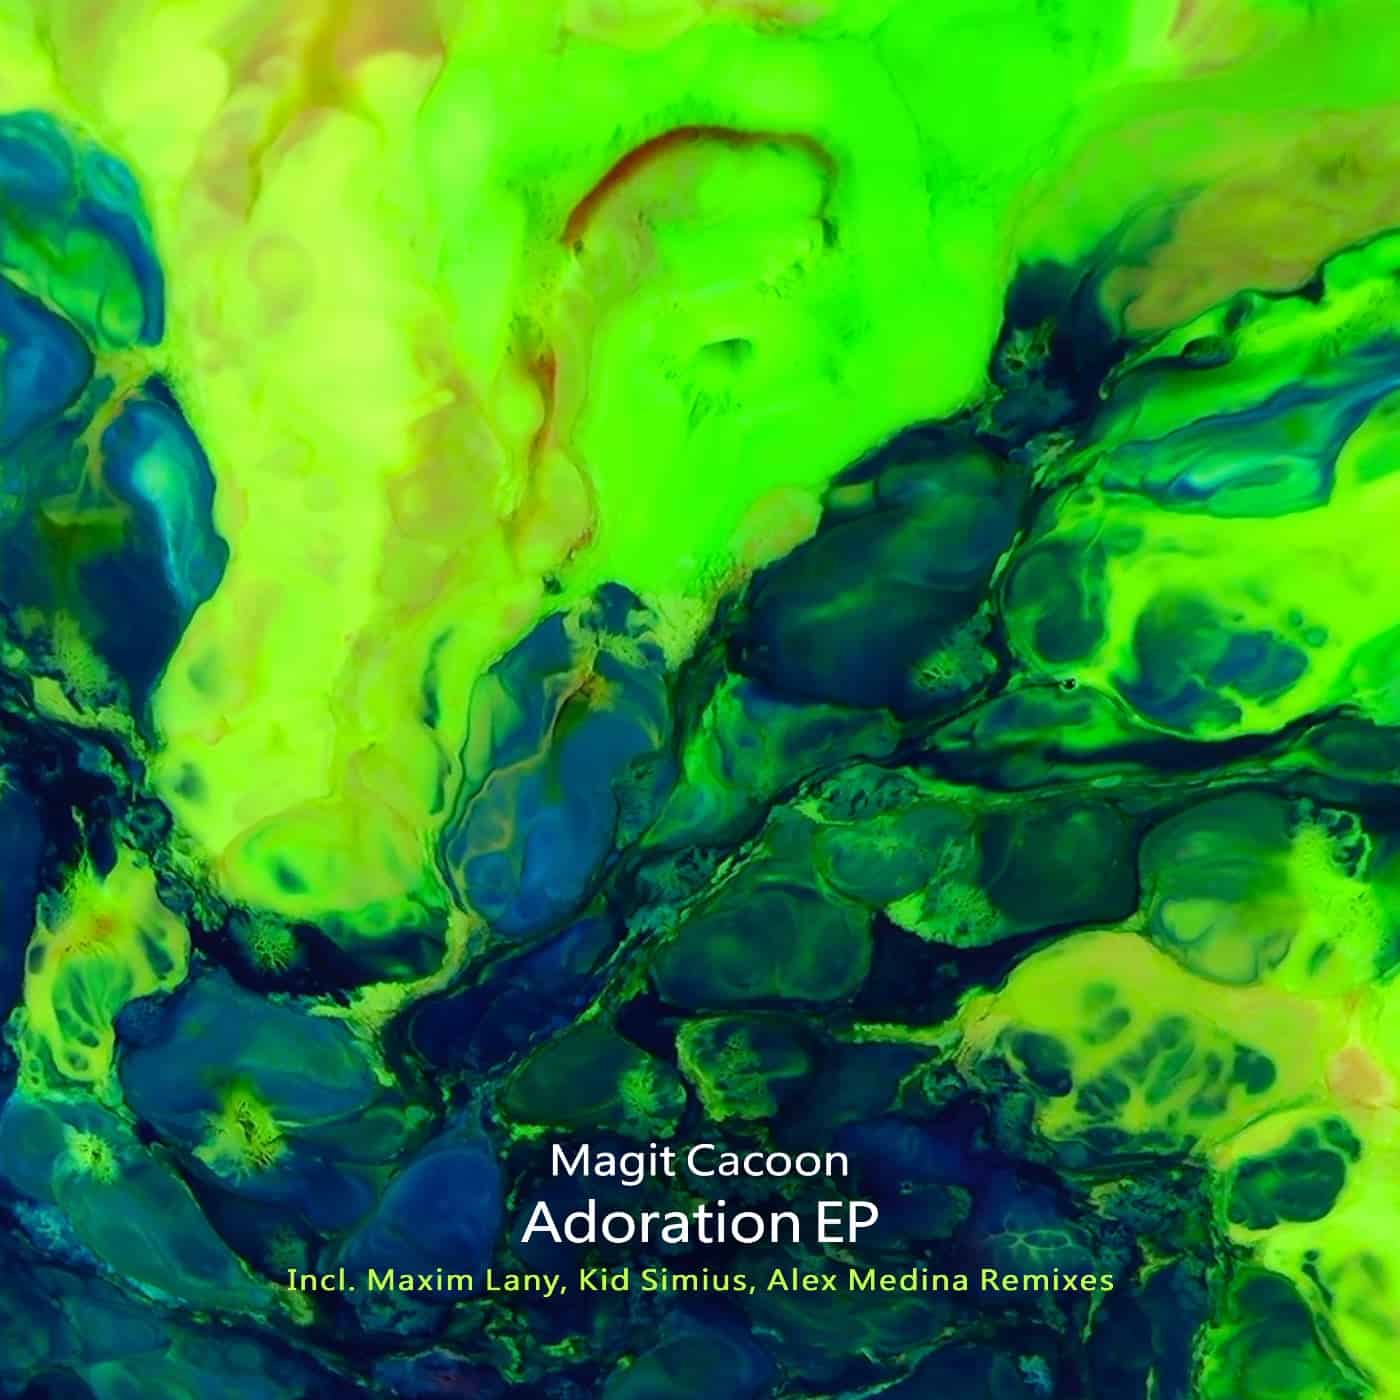 Download Magit Cacoon - Adoration on Electrobuzz